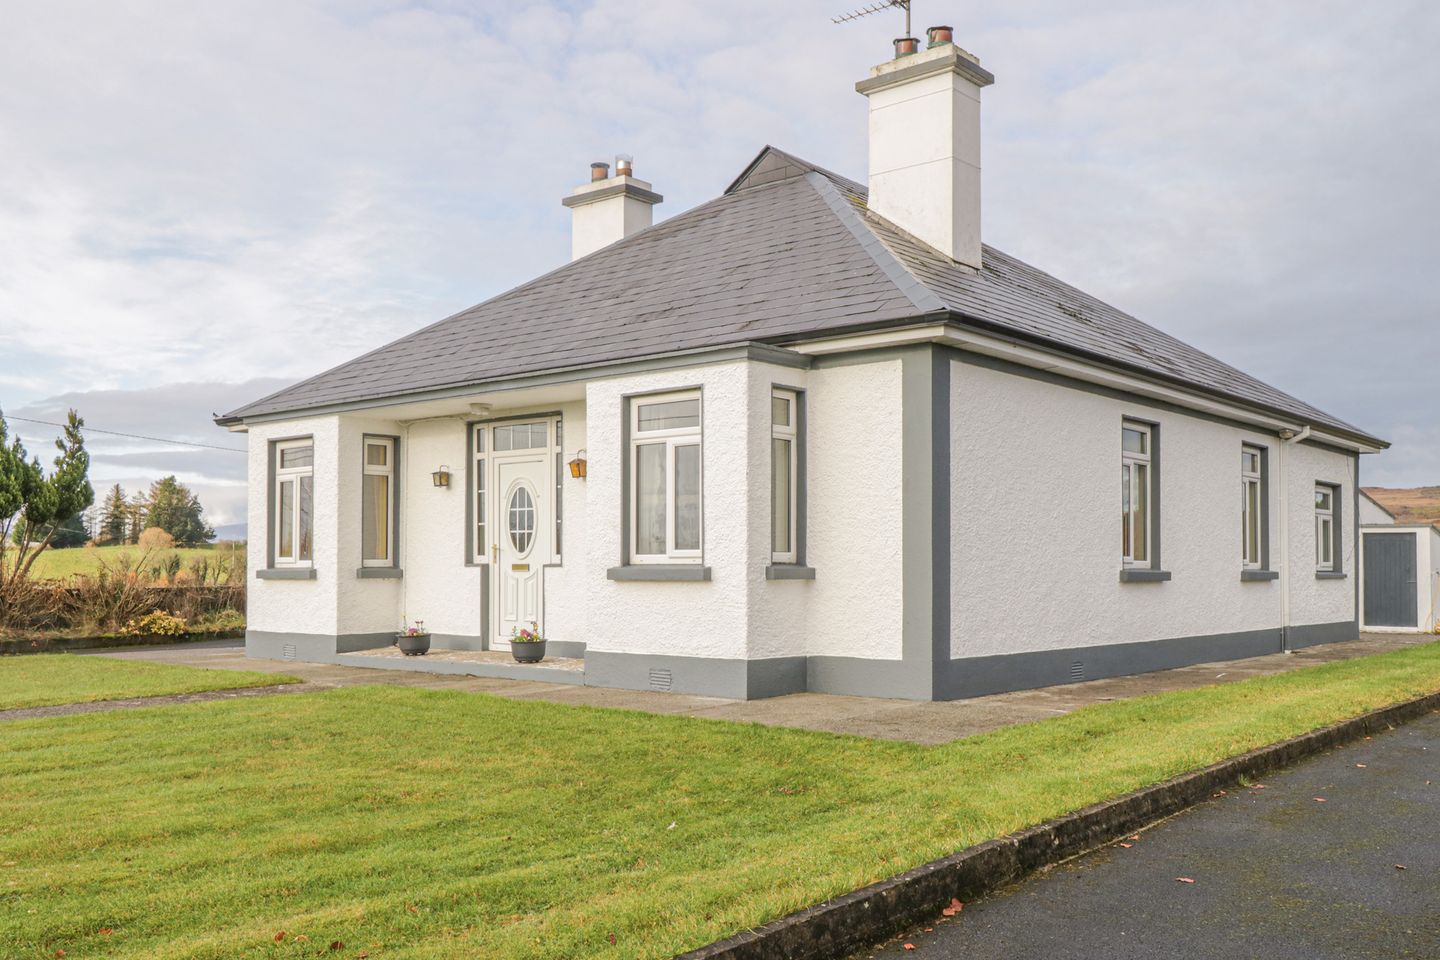 Ref. 1026969 Lime Tree Cottage, AUGHAWARD, Foxford, Co. Mayo